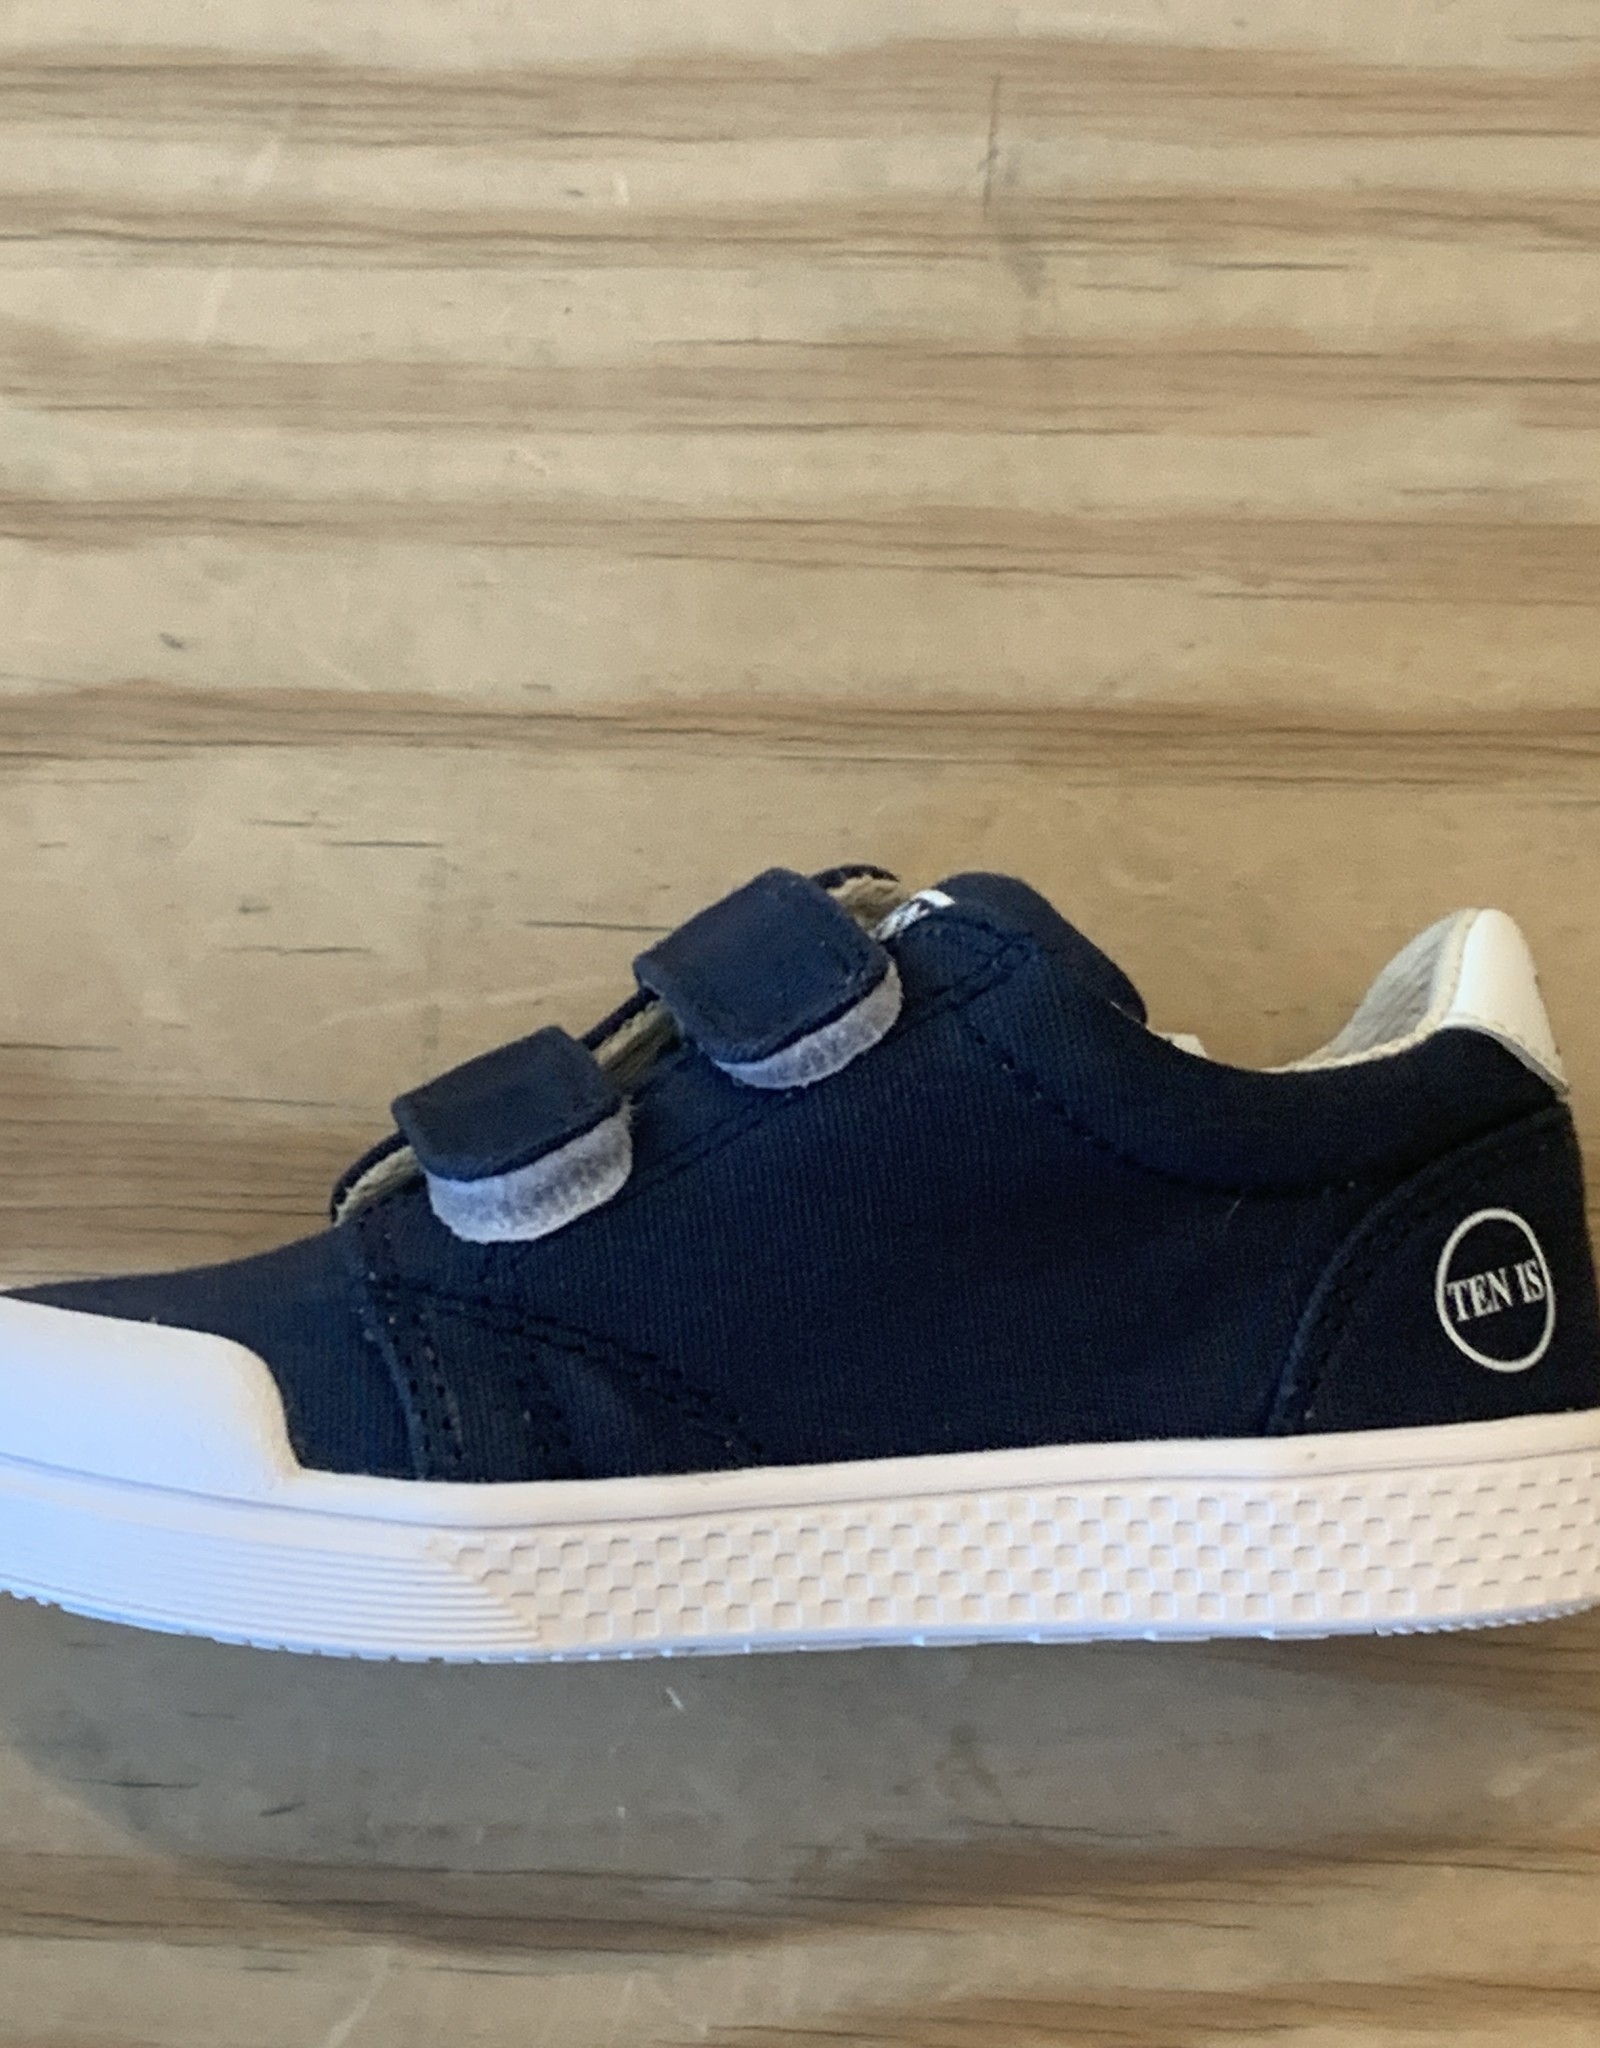 10IS 10IS TEN V2 CANVAS NAVY/WHITE